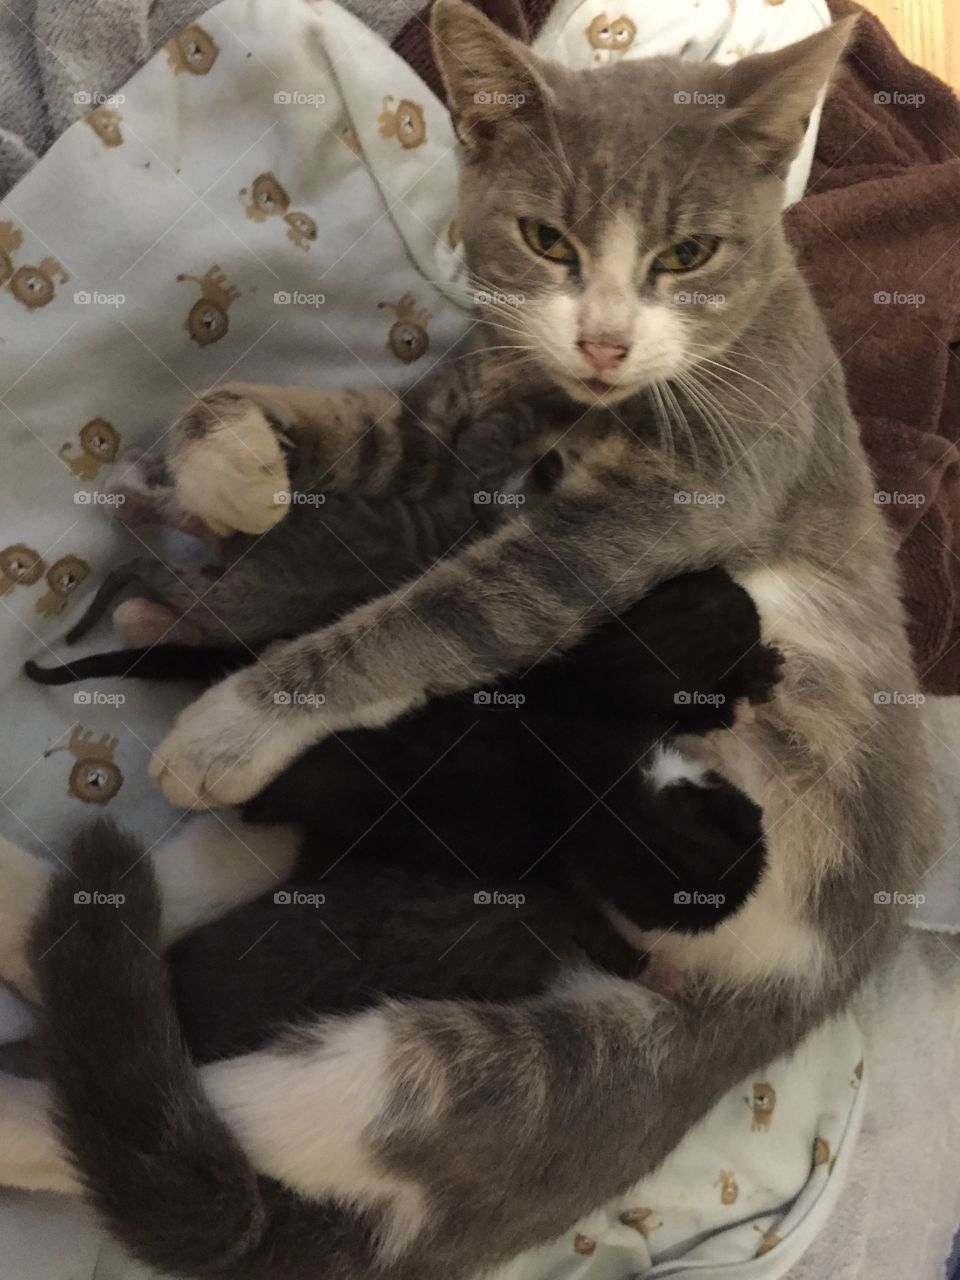 Beautiful gray cat with tuxedo feeding her 4 two week old kittens.